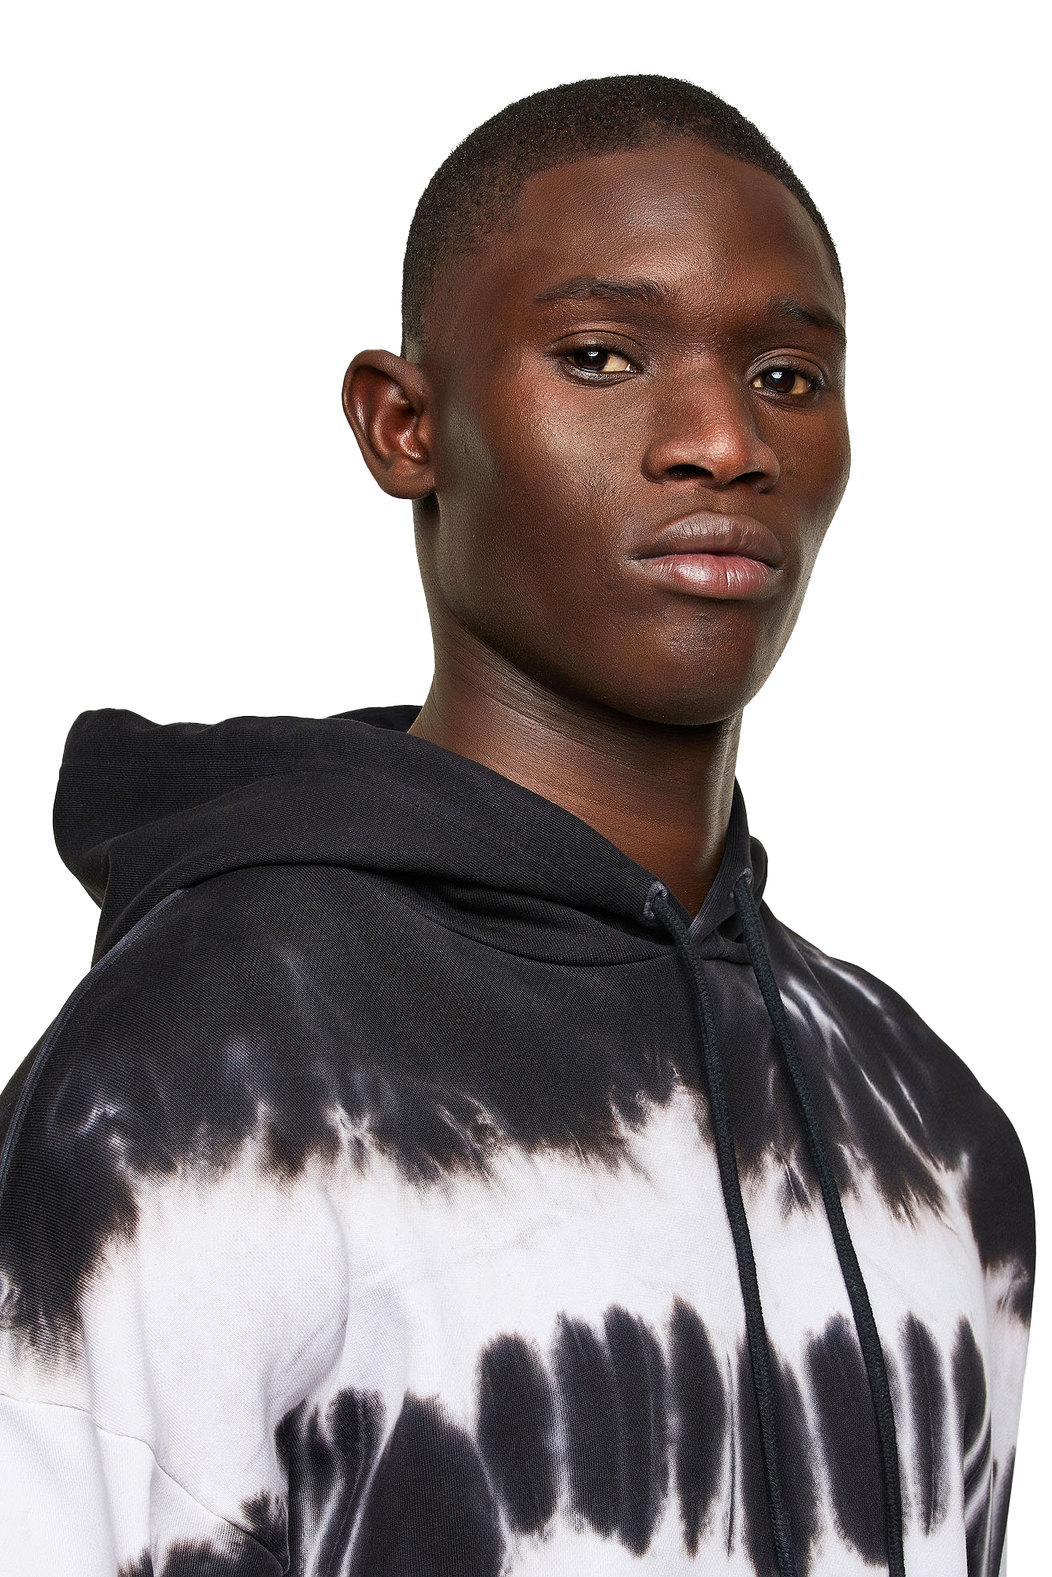 Tie-dye hoodie with reflective print